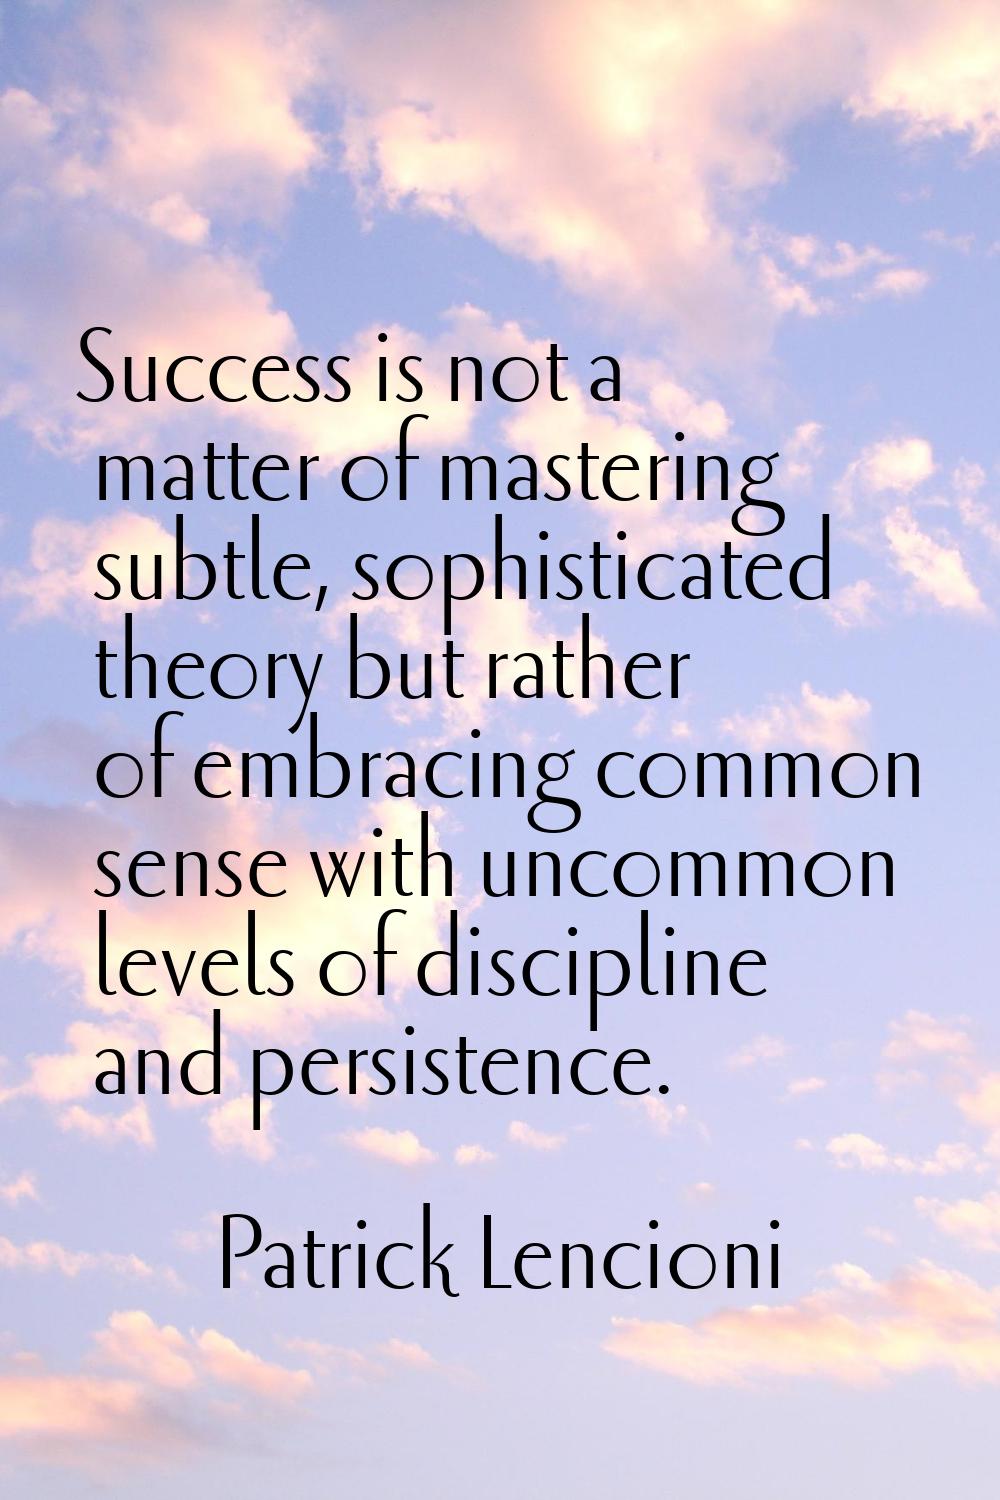 Success is not a matter of mastering subtle, sophisticated theory but rather of embracing common se